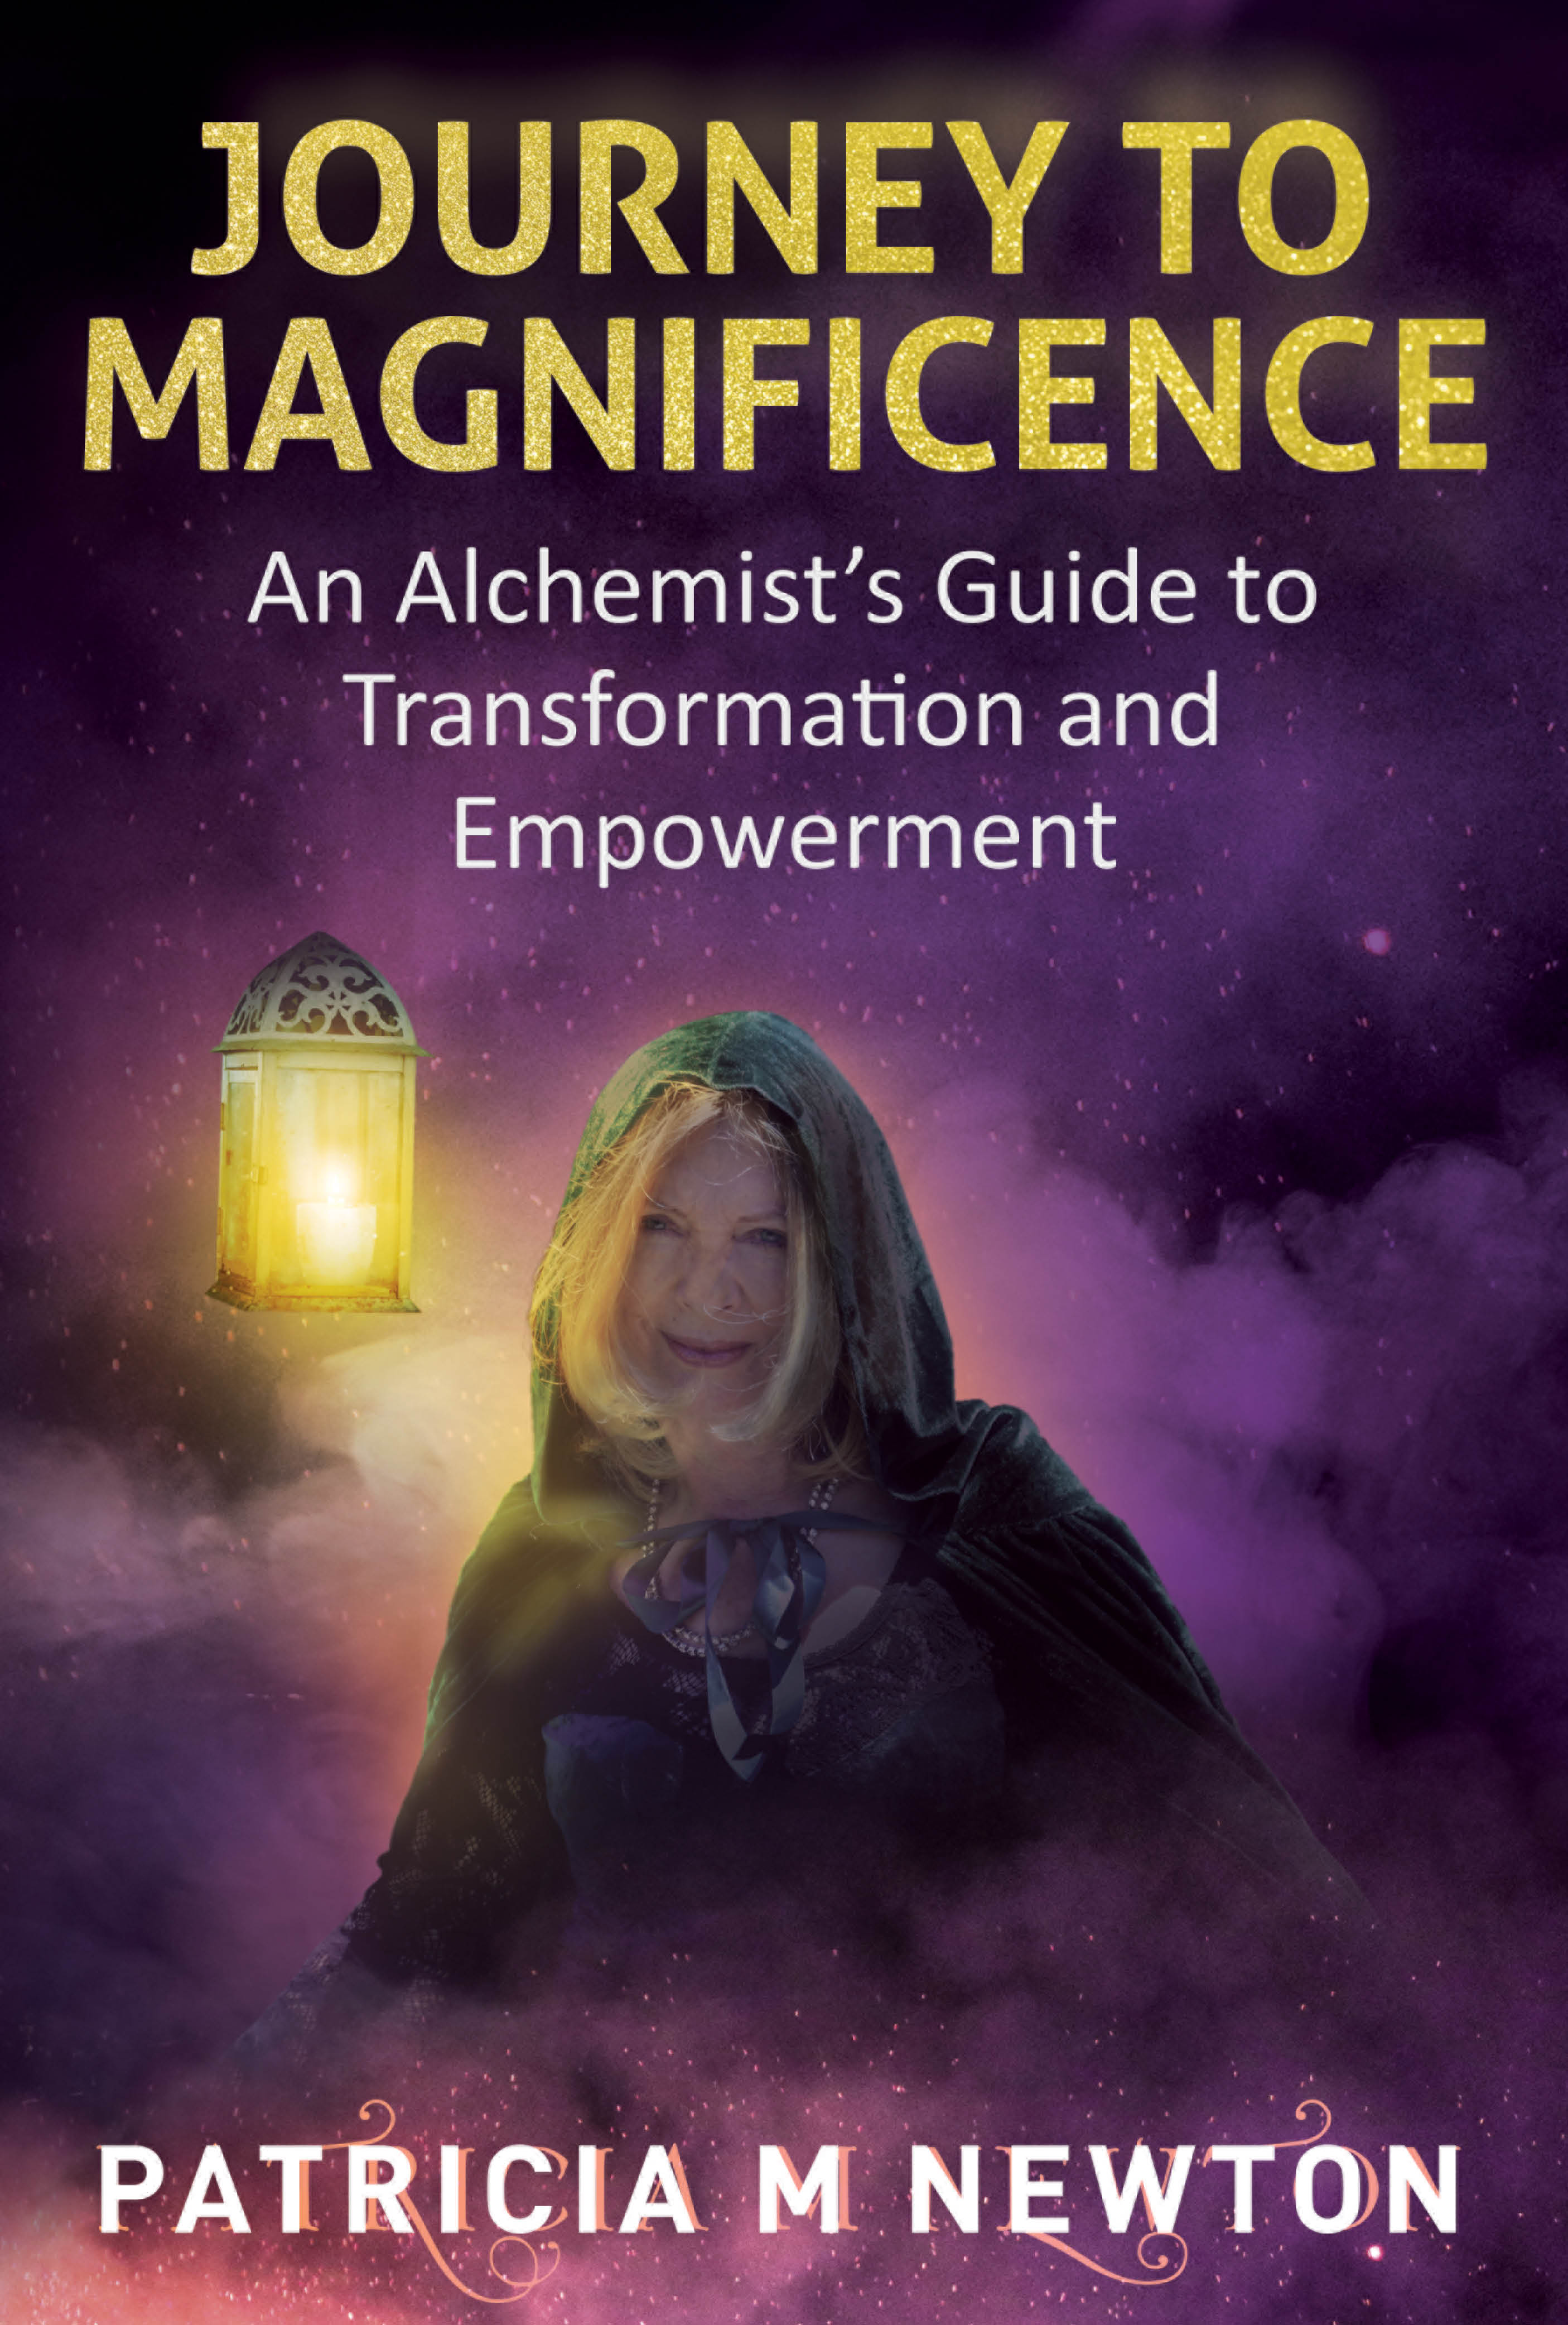 JOURNEY TO MAGNIFICENCE